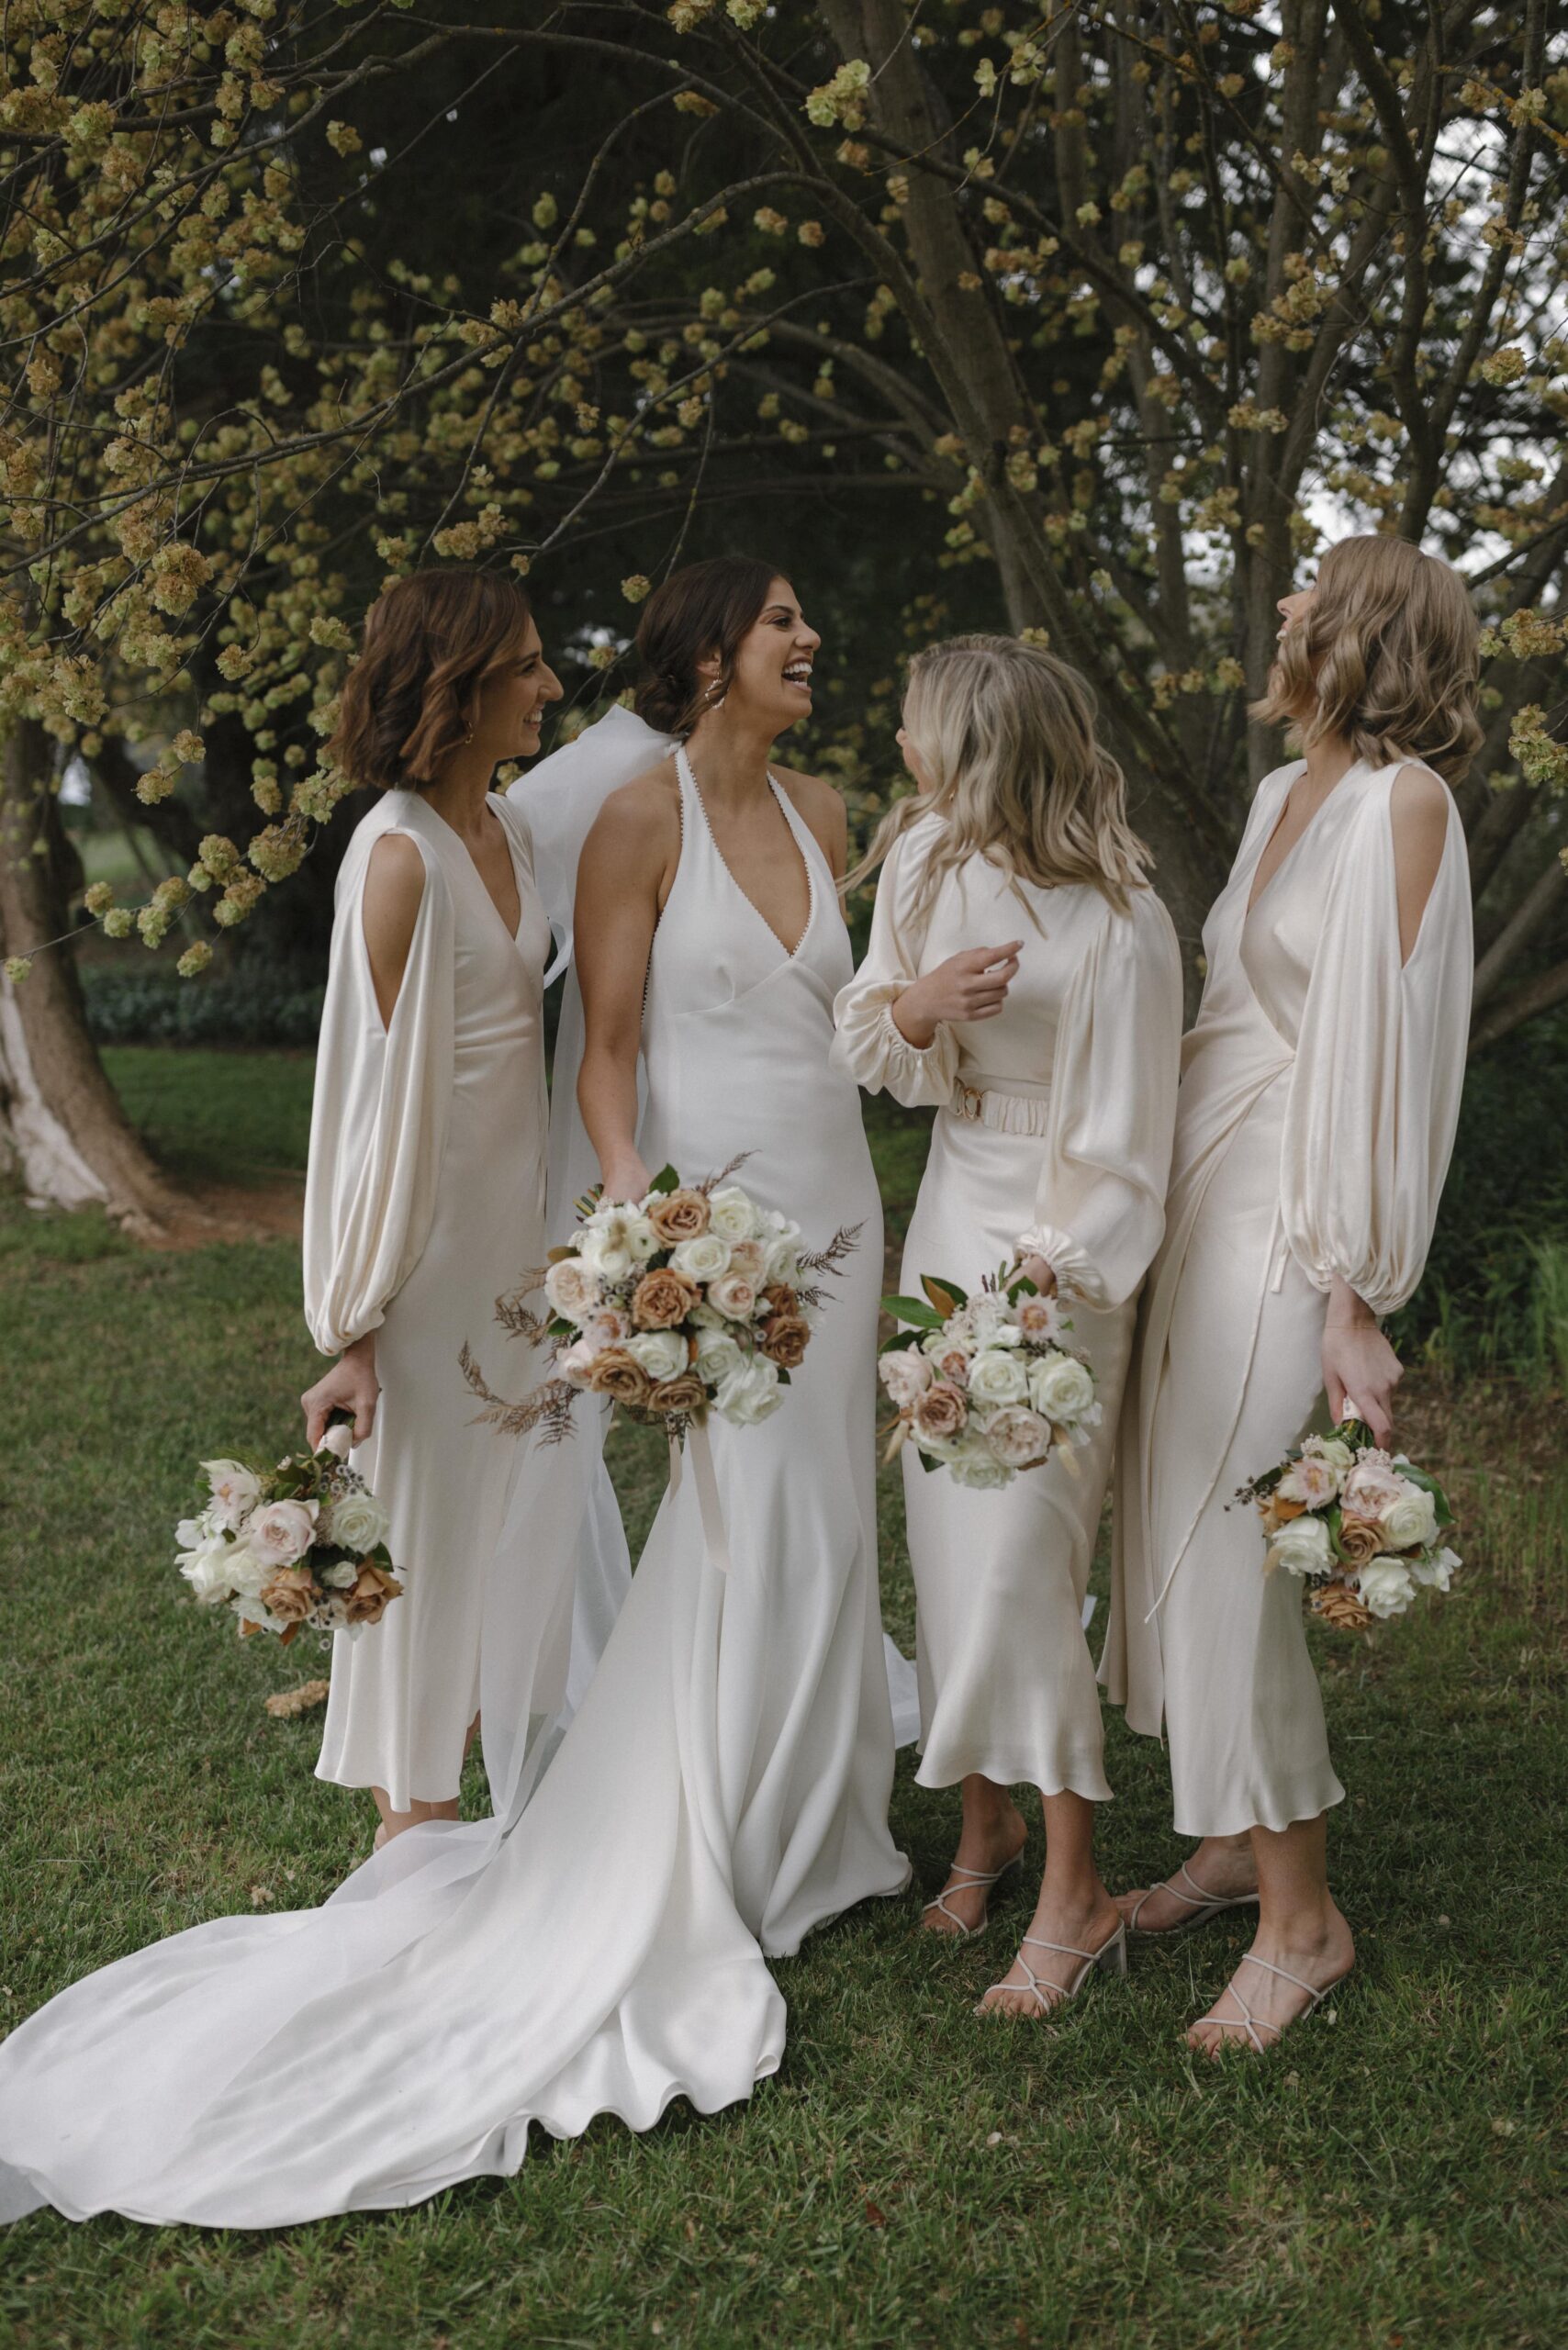 Olivia and bridesmaids holding bouquets caught in a moment of laughter